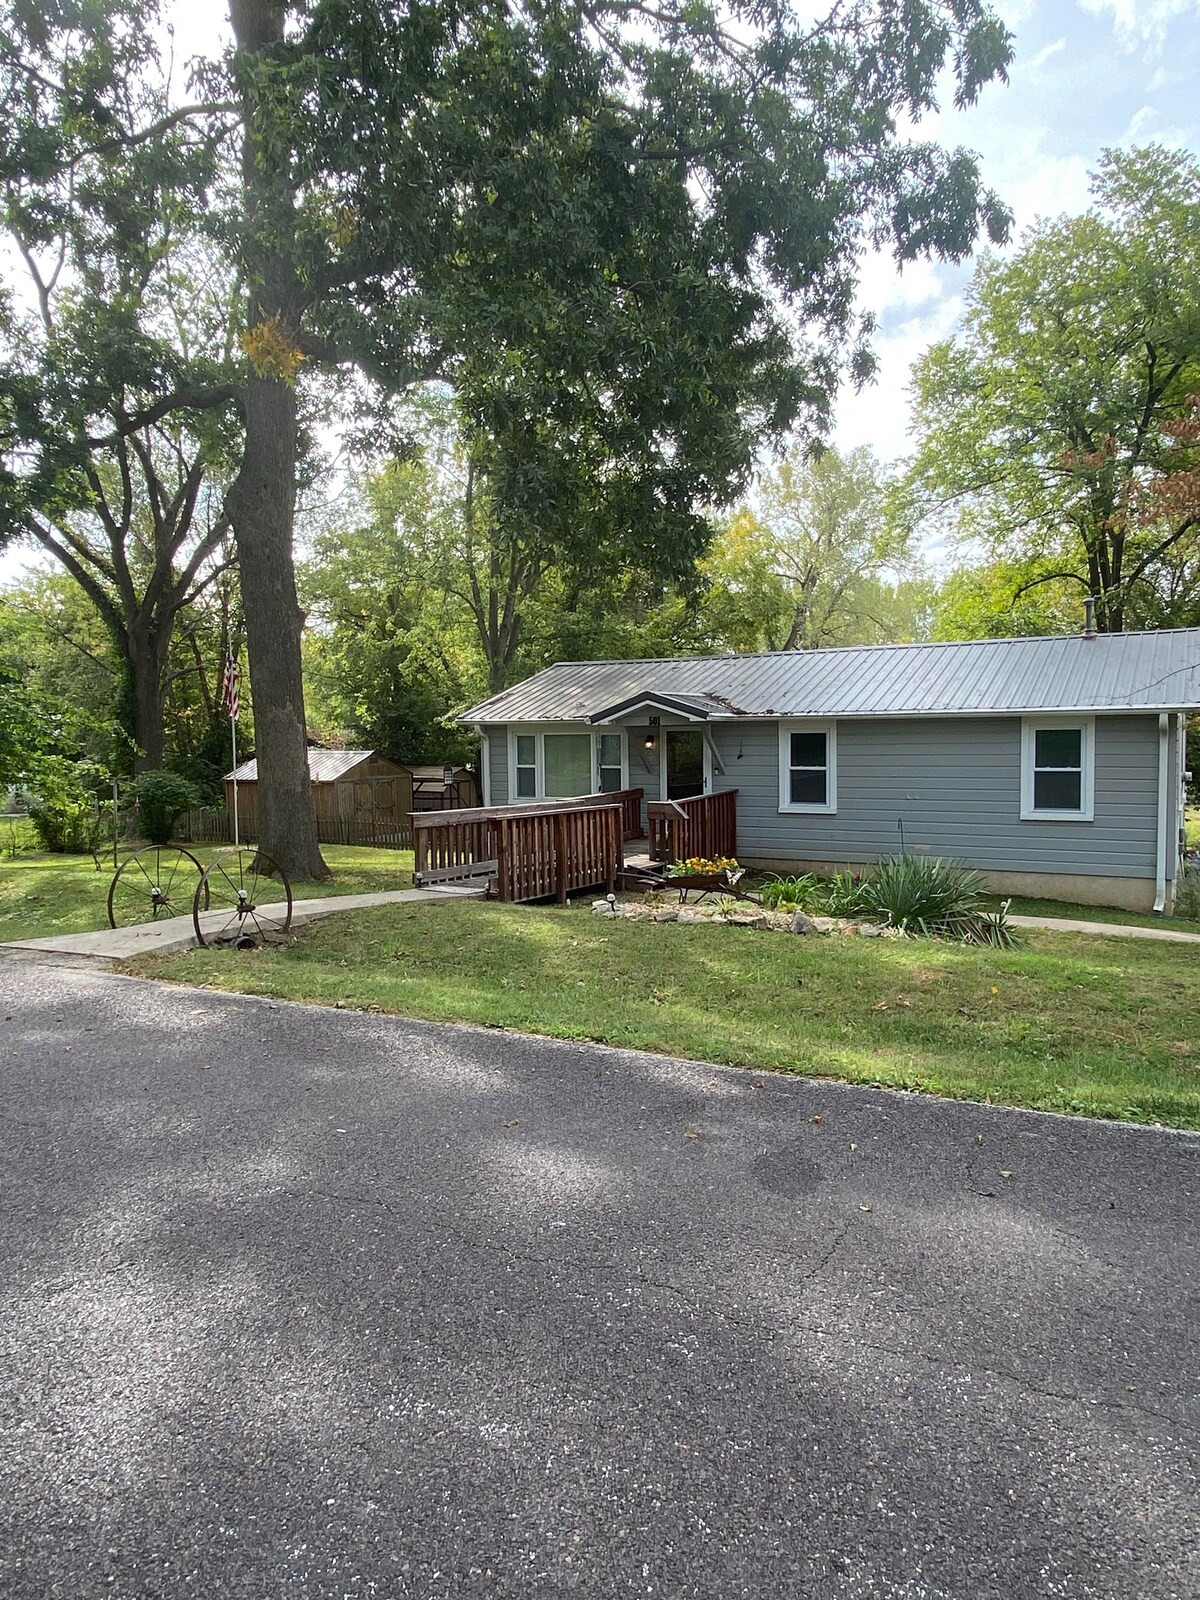 Family friendly home near trail in Rocheport, MO